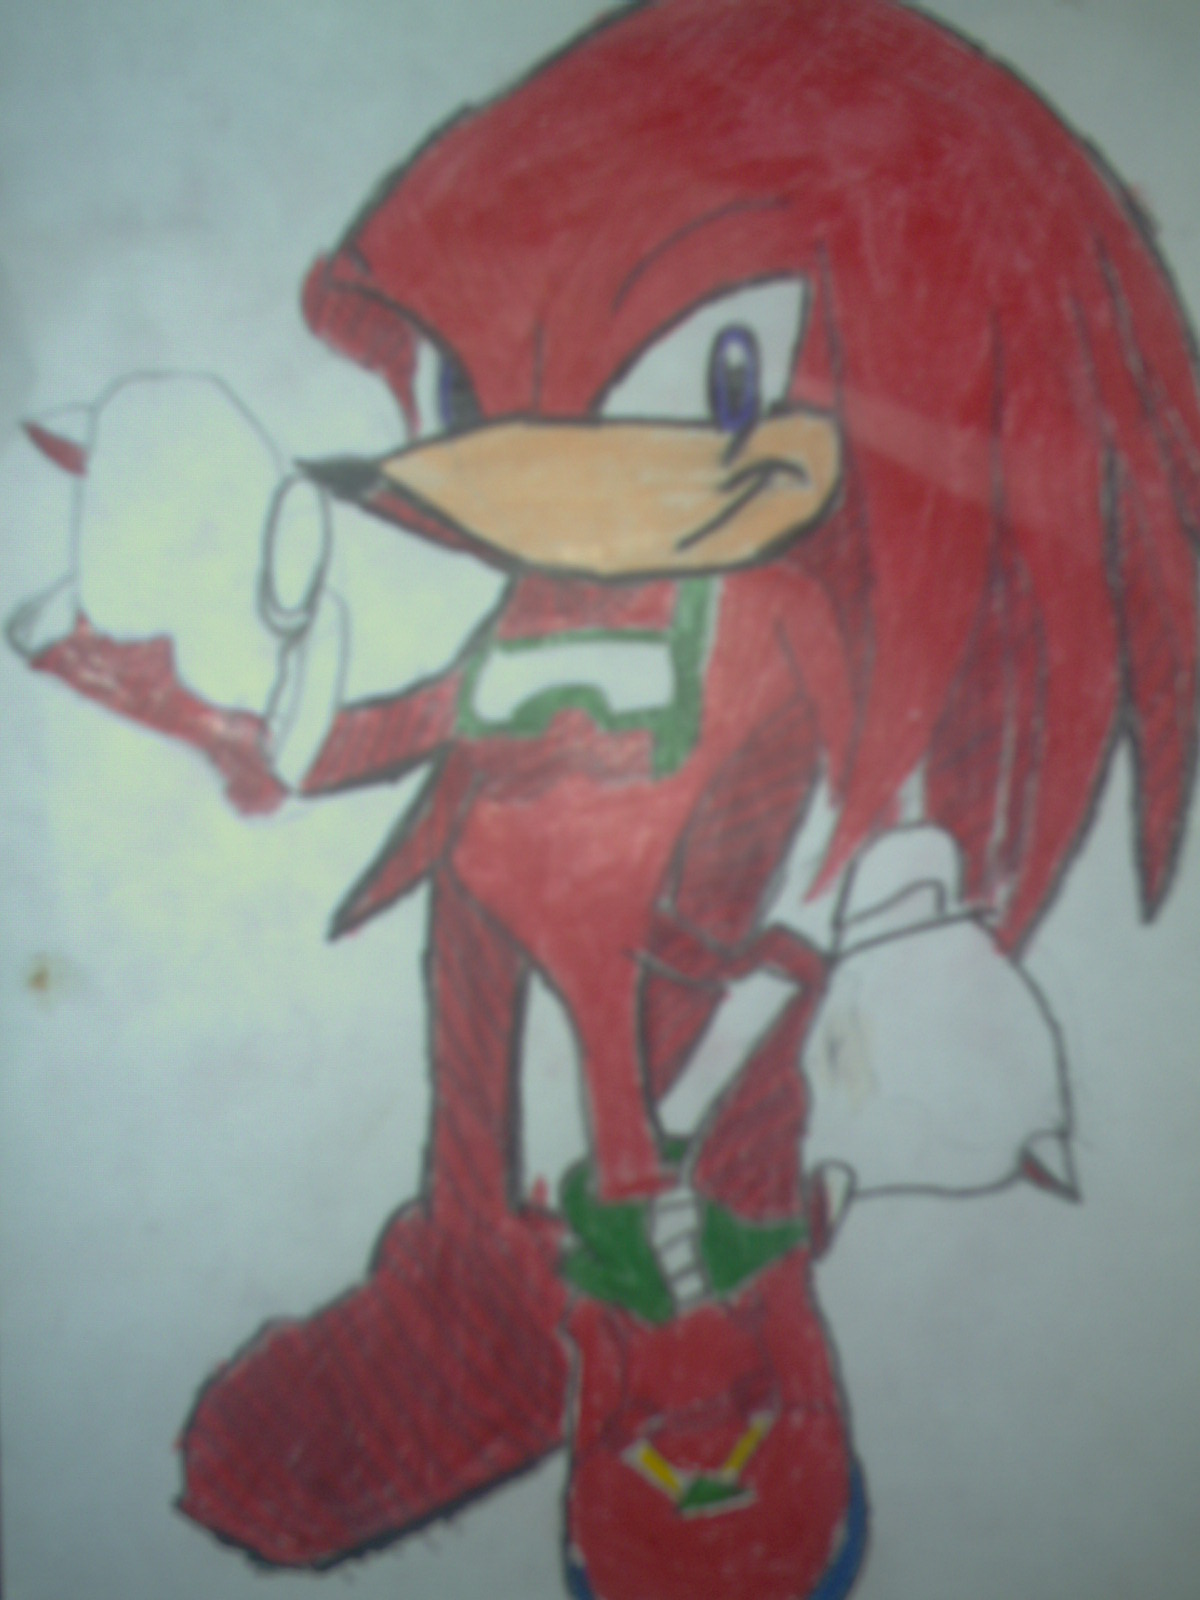 knuckles by conman554